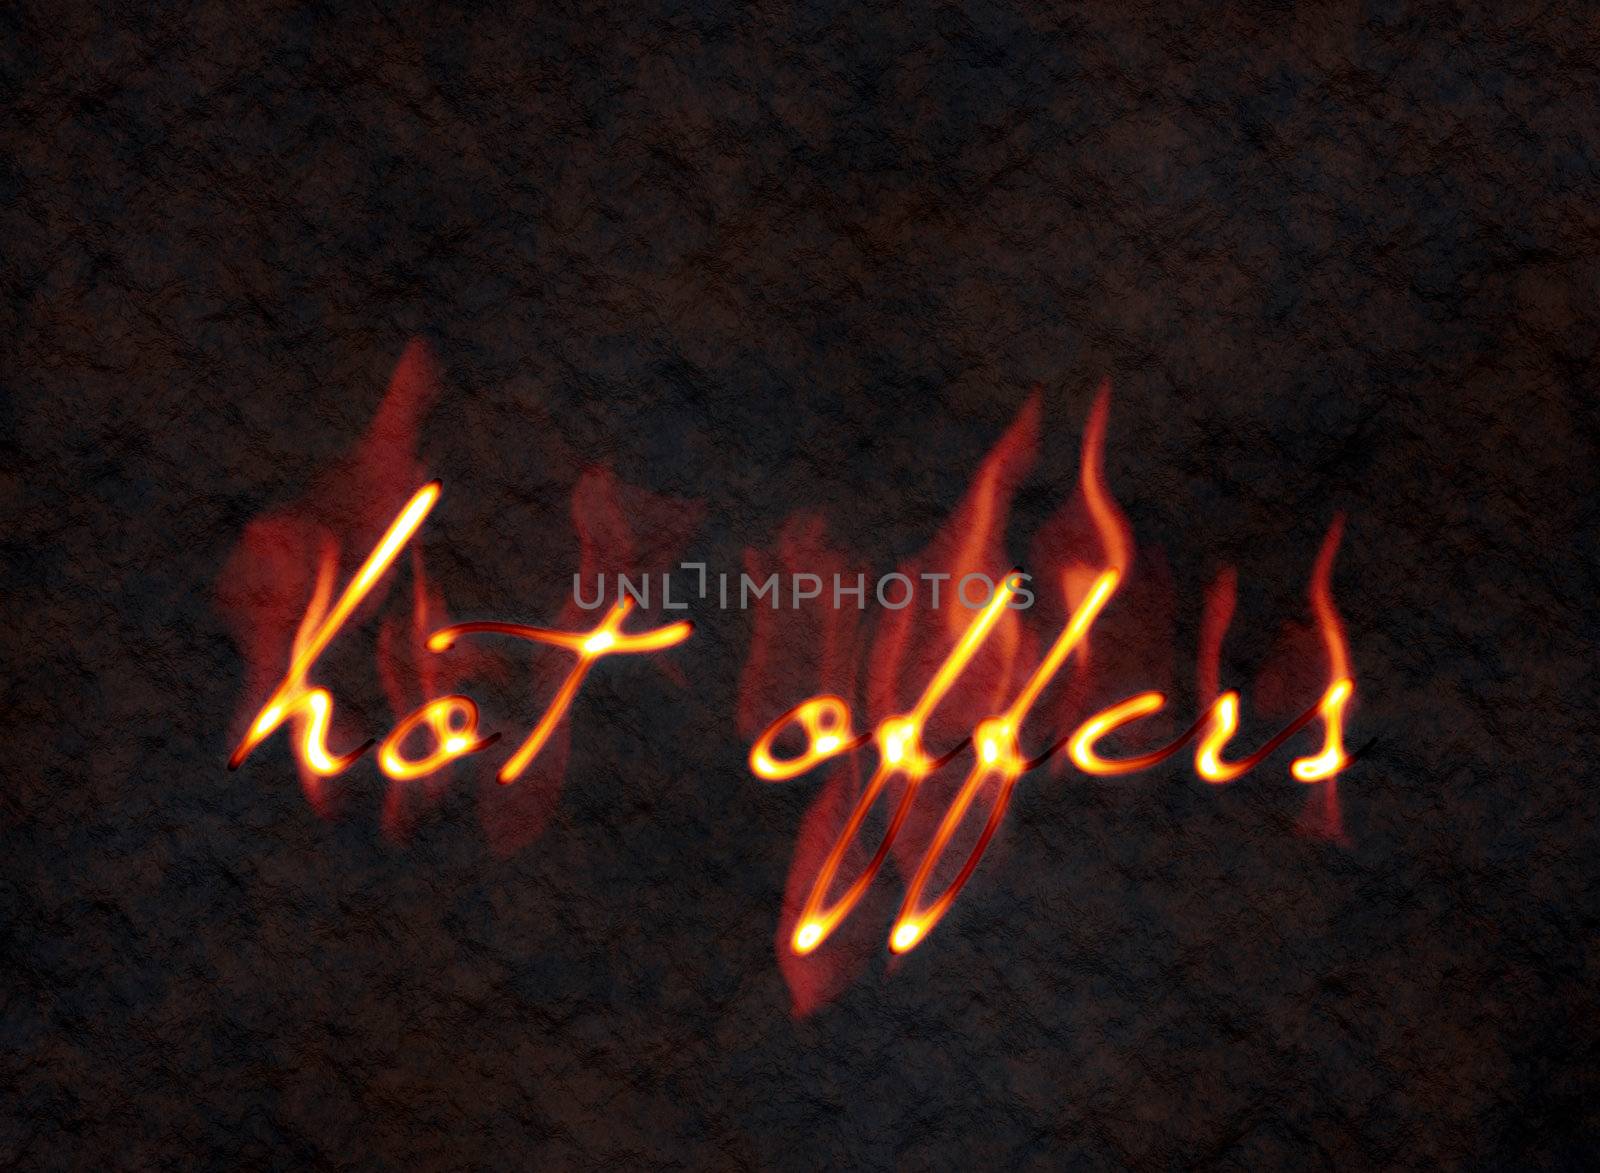 An illustration of a hot offers sign in fire